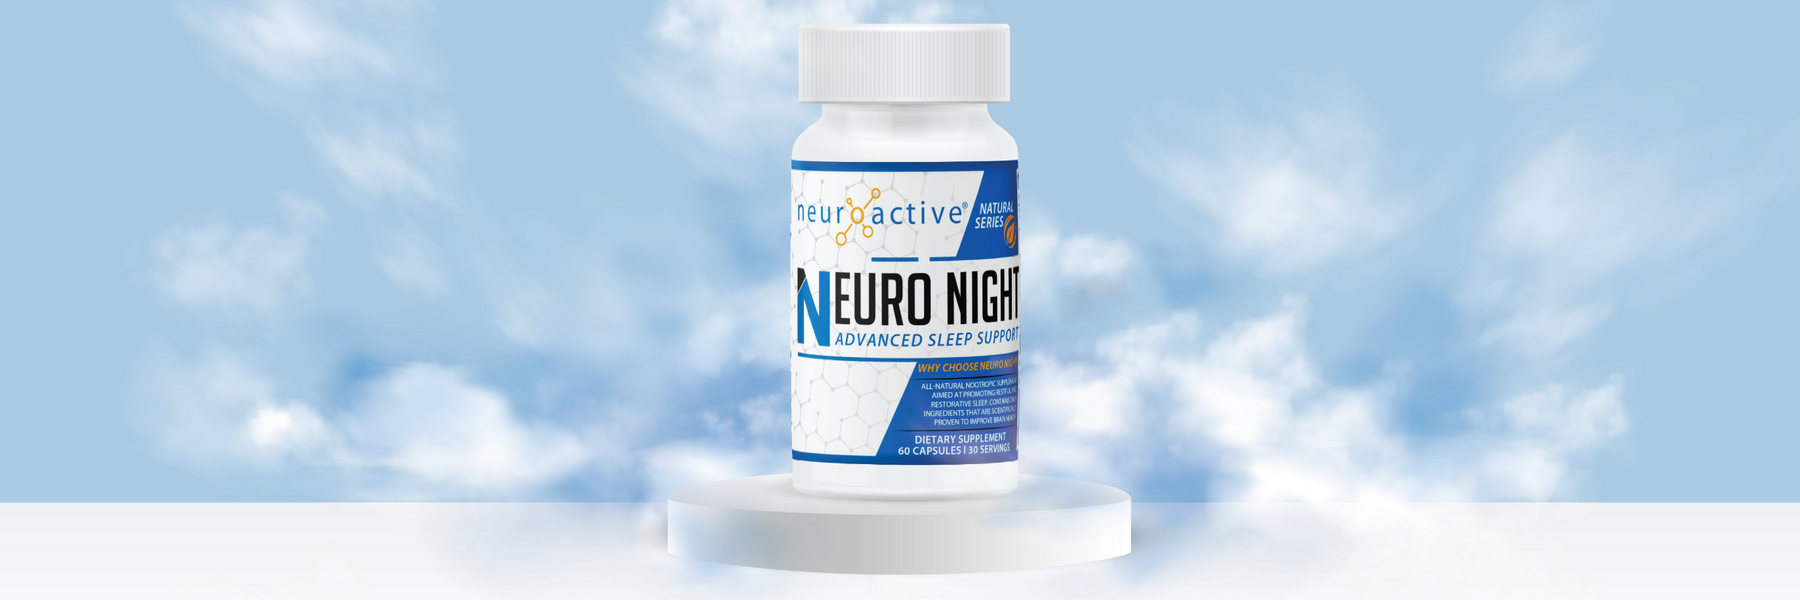 Neuro Night Product Review